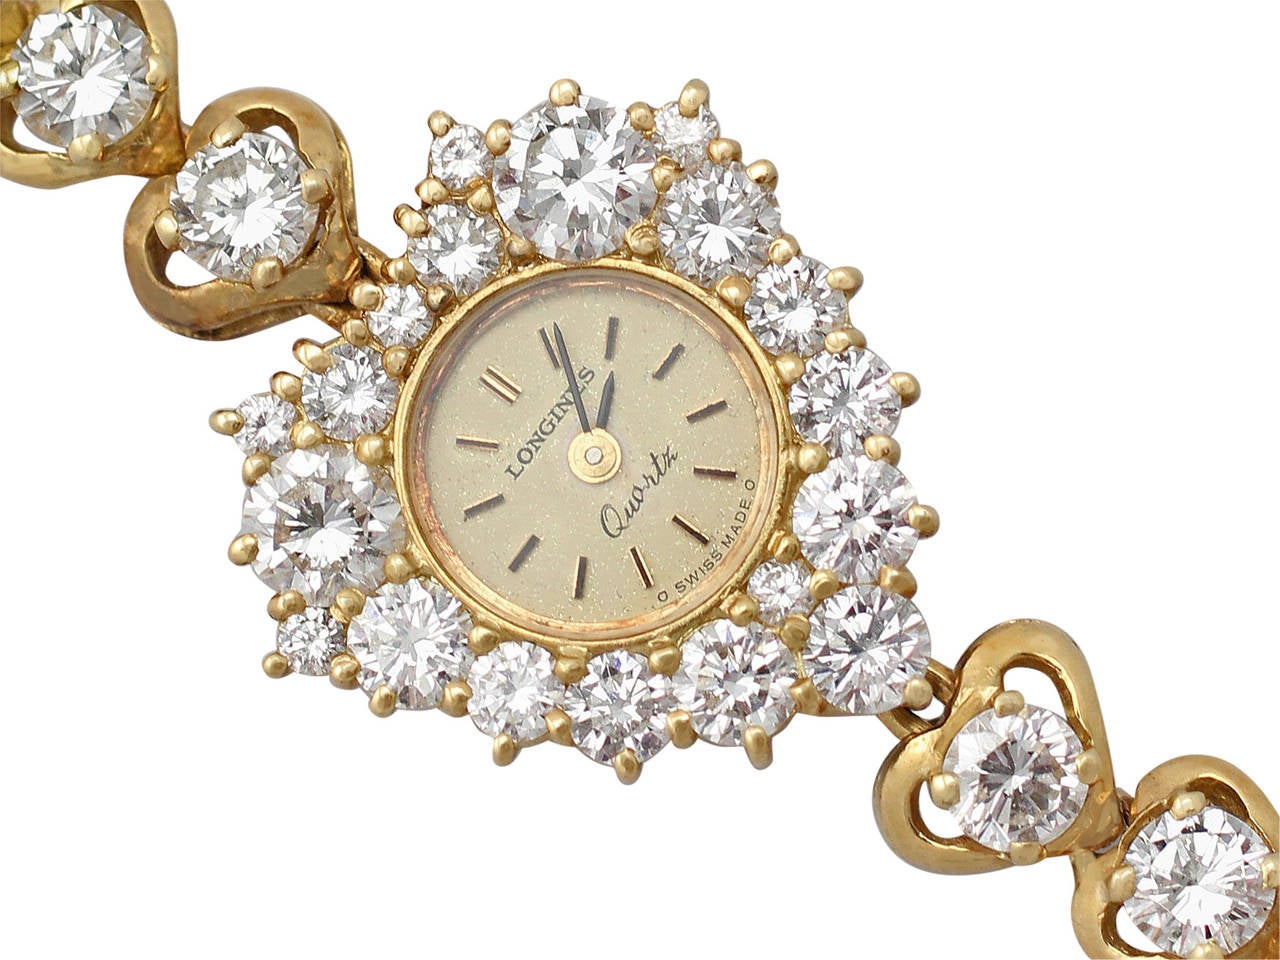 This fine contemporary quartz diamond cocktail watch made by Longines has been crafted in 18k yellow gold.

The eye-catching heart shaped watch bezel is embellished with nineteen modern brilliant round cut diamonds of various sizes, claw set to